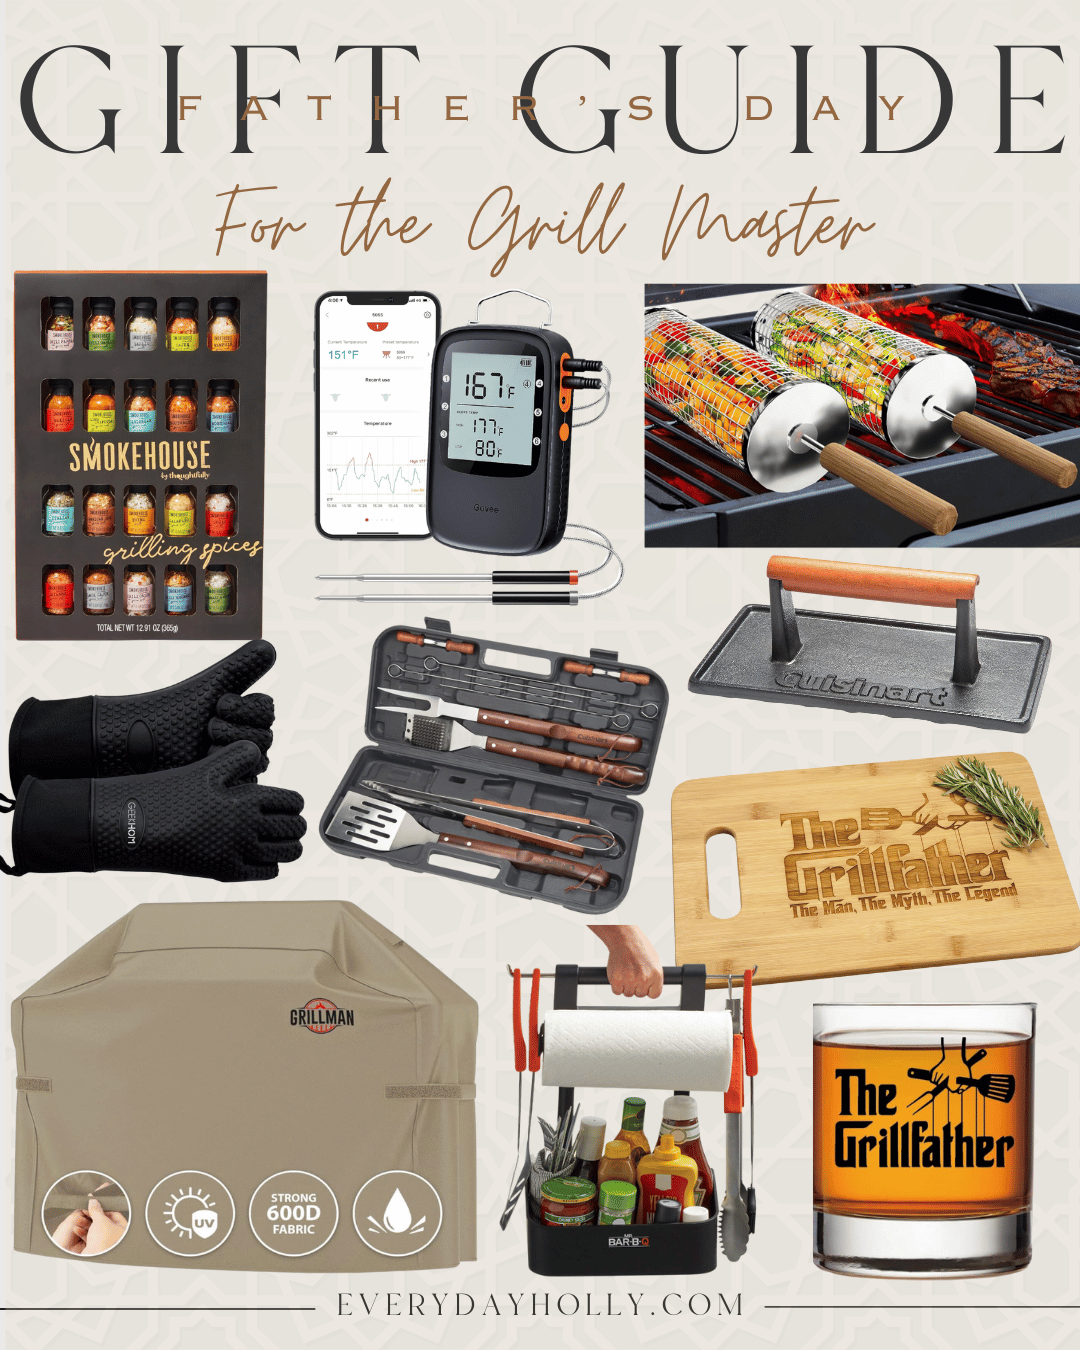 55 Gift Ideas your Dad will love this Father's Day | Father's Day, Father's day gift guide, gifts for dad, gifts for him, grill master, grill gift, grilling accessories, the grillfather, Amazon